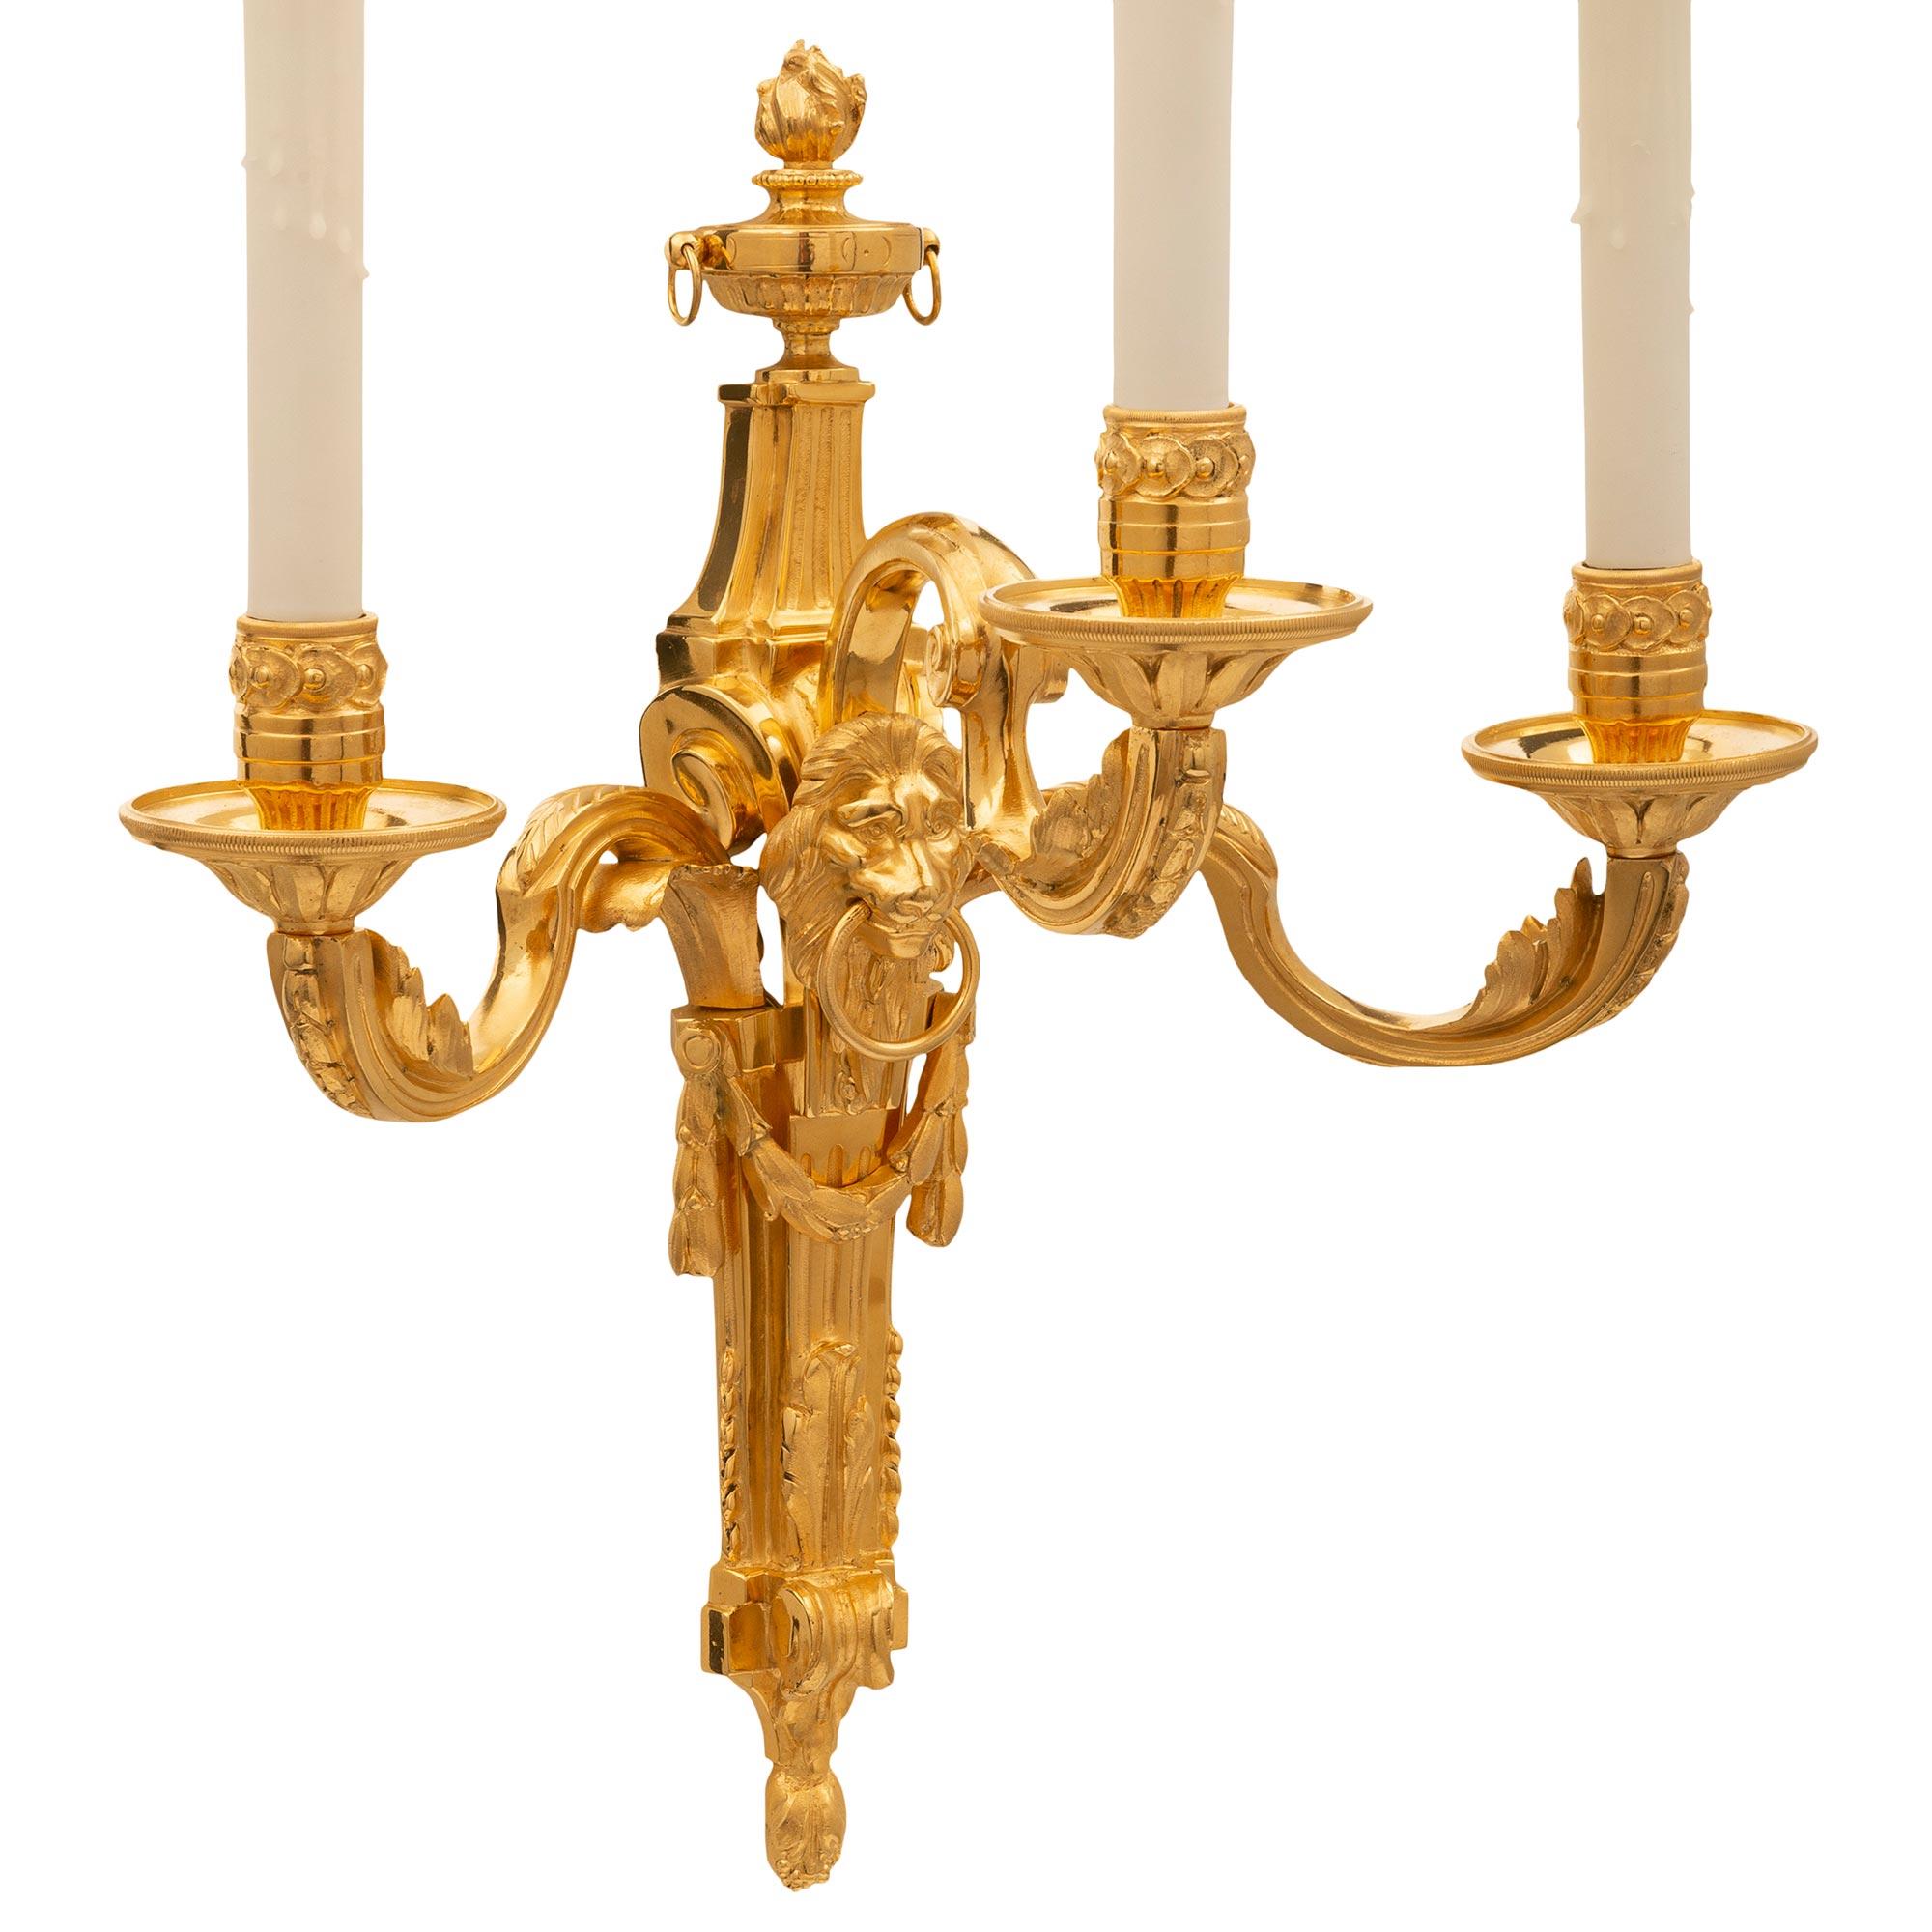 A striking and most elegant pair of French 19th century Louis XVI st. ormolu sconces. Each three arm sconce is centered by beautiful backplates with richly chased foliate designs, lovely swaging berried laurel garlands, handsome lion heads with